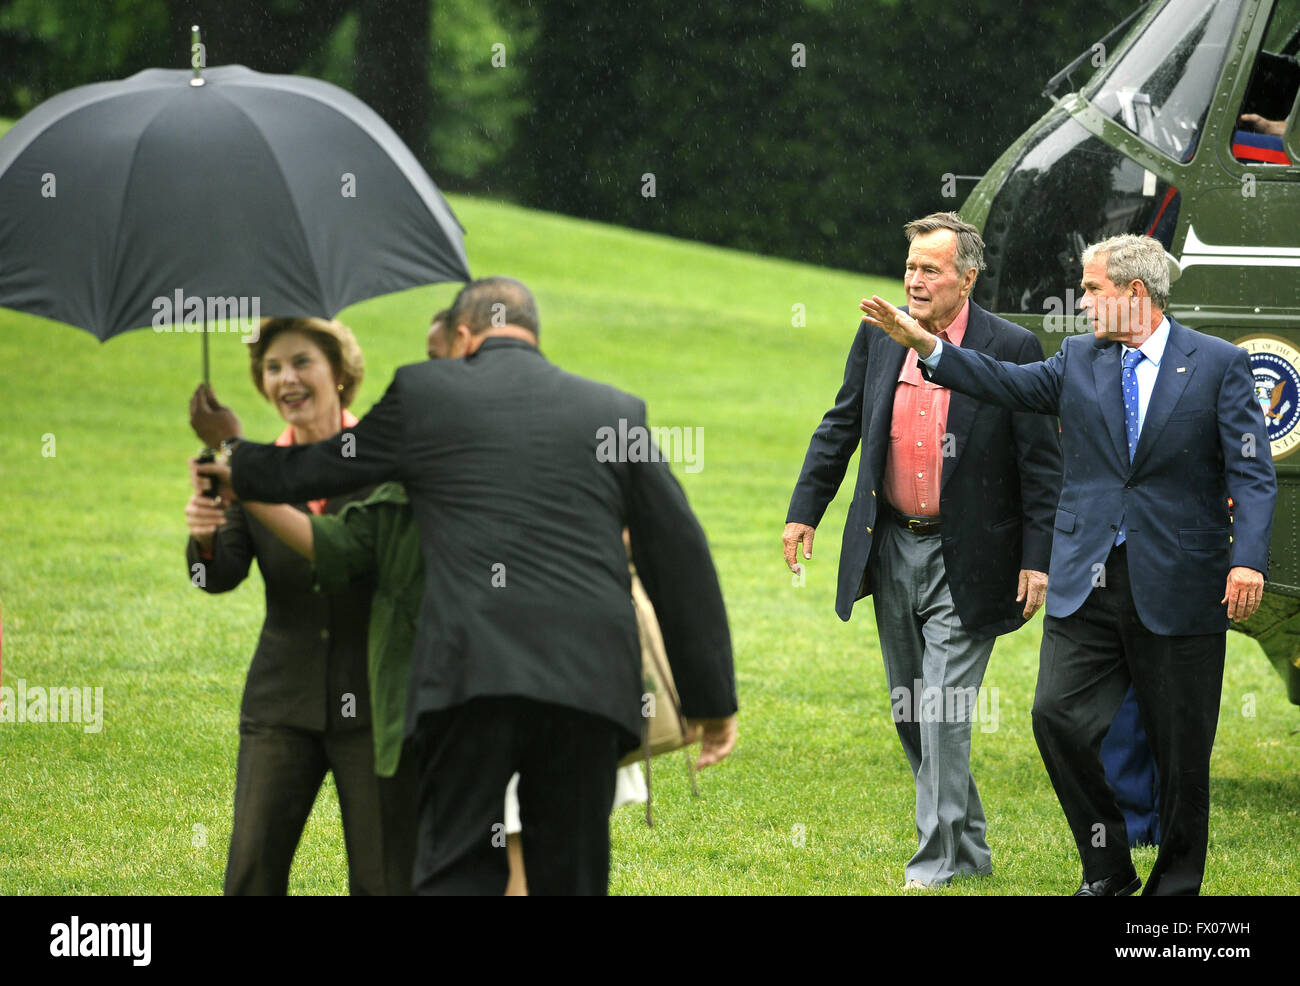 Washington, District of Columbia, USA. 11th May, 2008. Former United States President George H.W. Bush (2nd, R) walks with US President George W. Bush as an aide assists first lady Laura Bush with an umbrella as they arrive at the White House from a weekend at the Crawford, Texas ranch, 11 May 2008 in Washington, DC. Bush, whose daughter Jenna married Henry Hager at the ranch, described the experience as 'spectacular' and 'it's all we could have hoped for'. Credit: Mike Theiler/Pool via CNP © Mike Theiler/CNP/ZUMA Wire/Alamy Live News Stock Photo